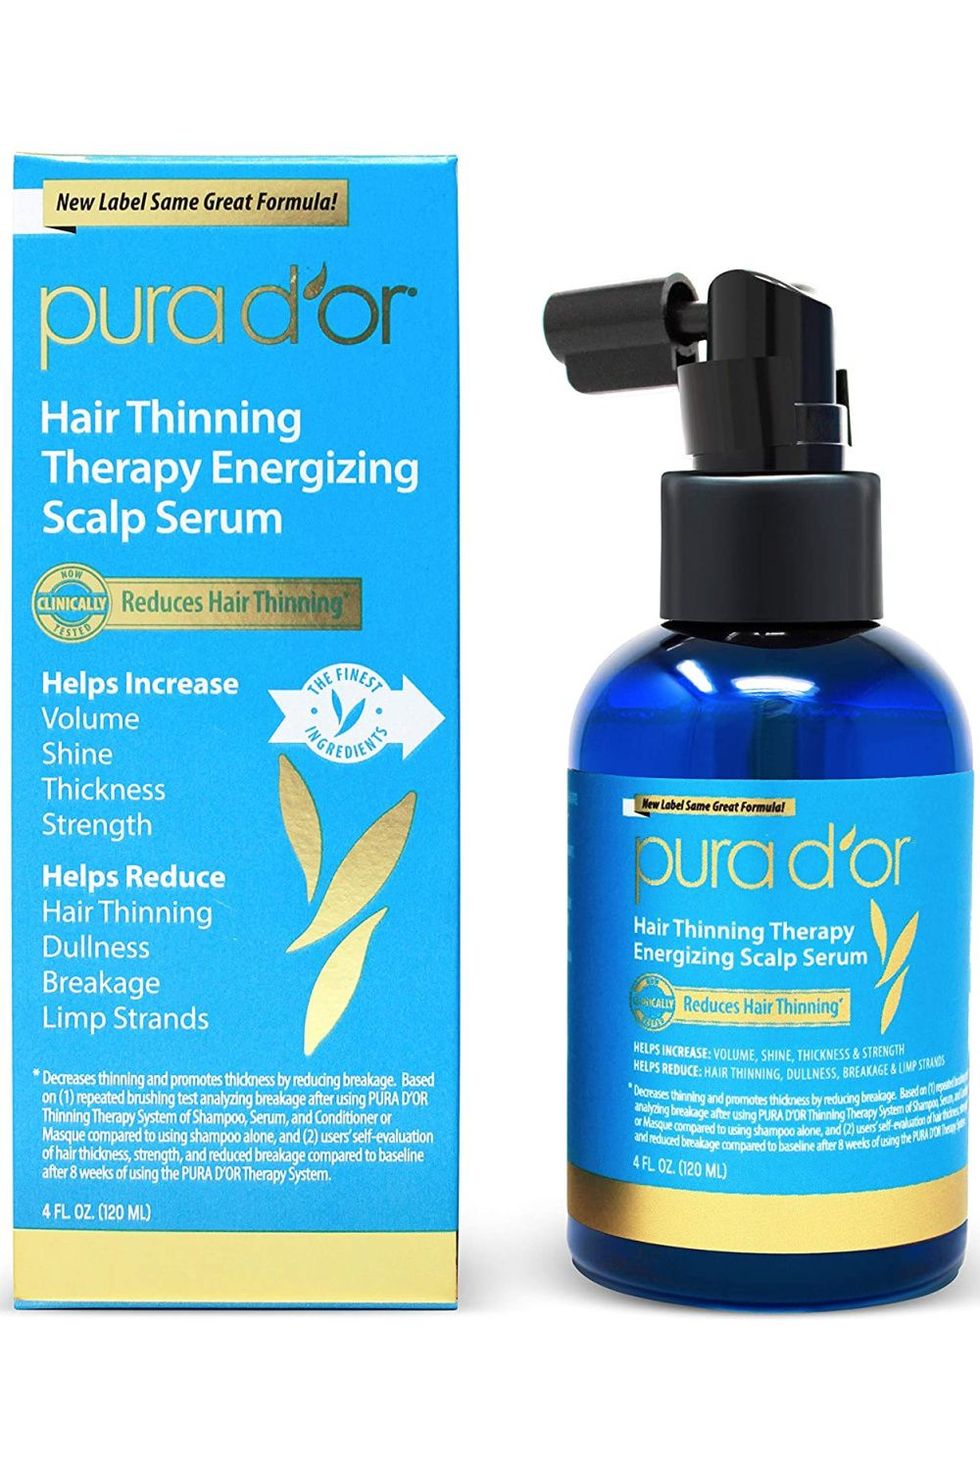 Pura D'or Hair Thinning Therapy Energizing Scalp Serum